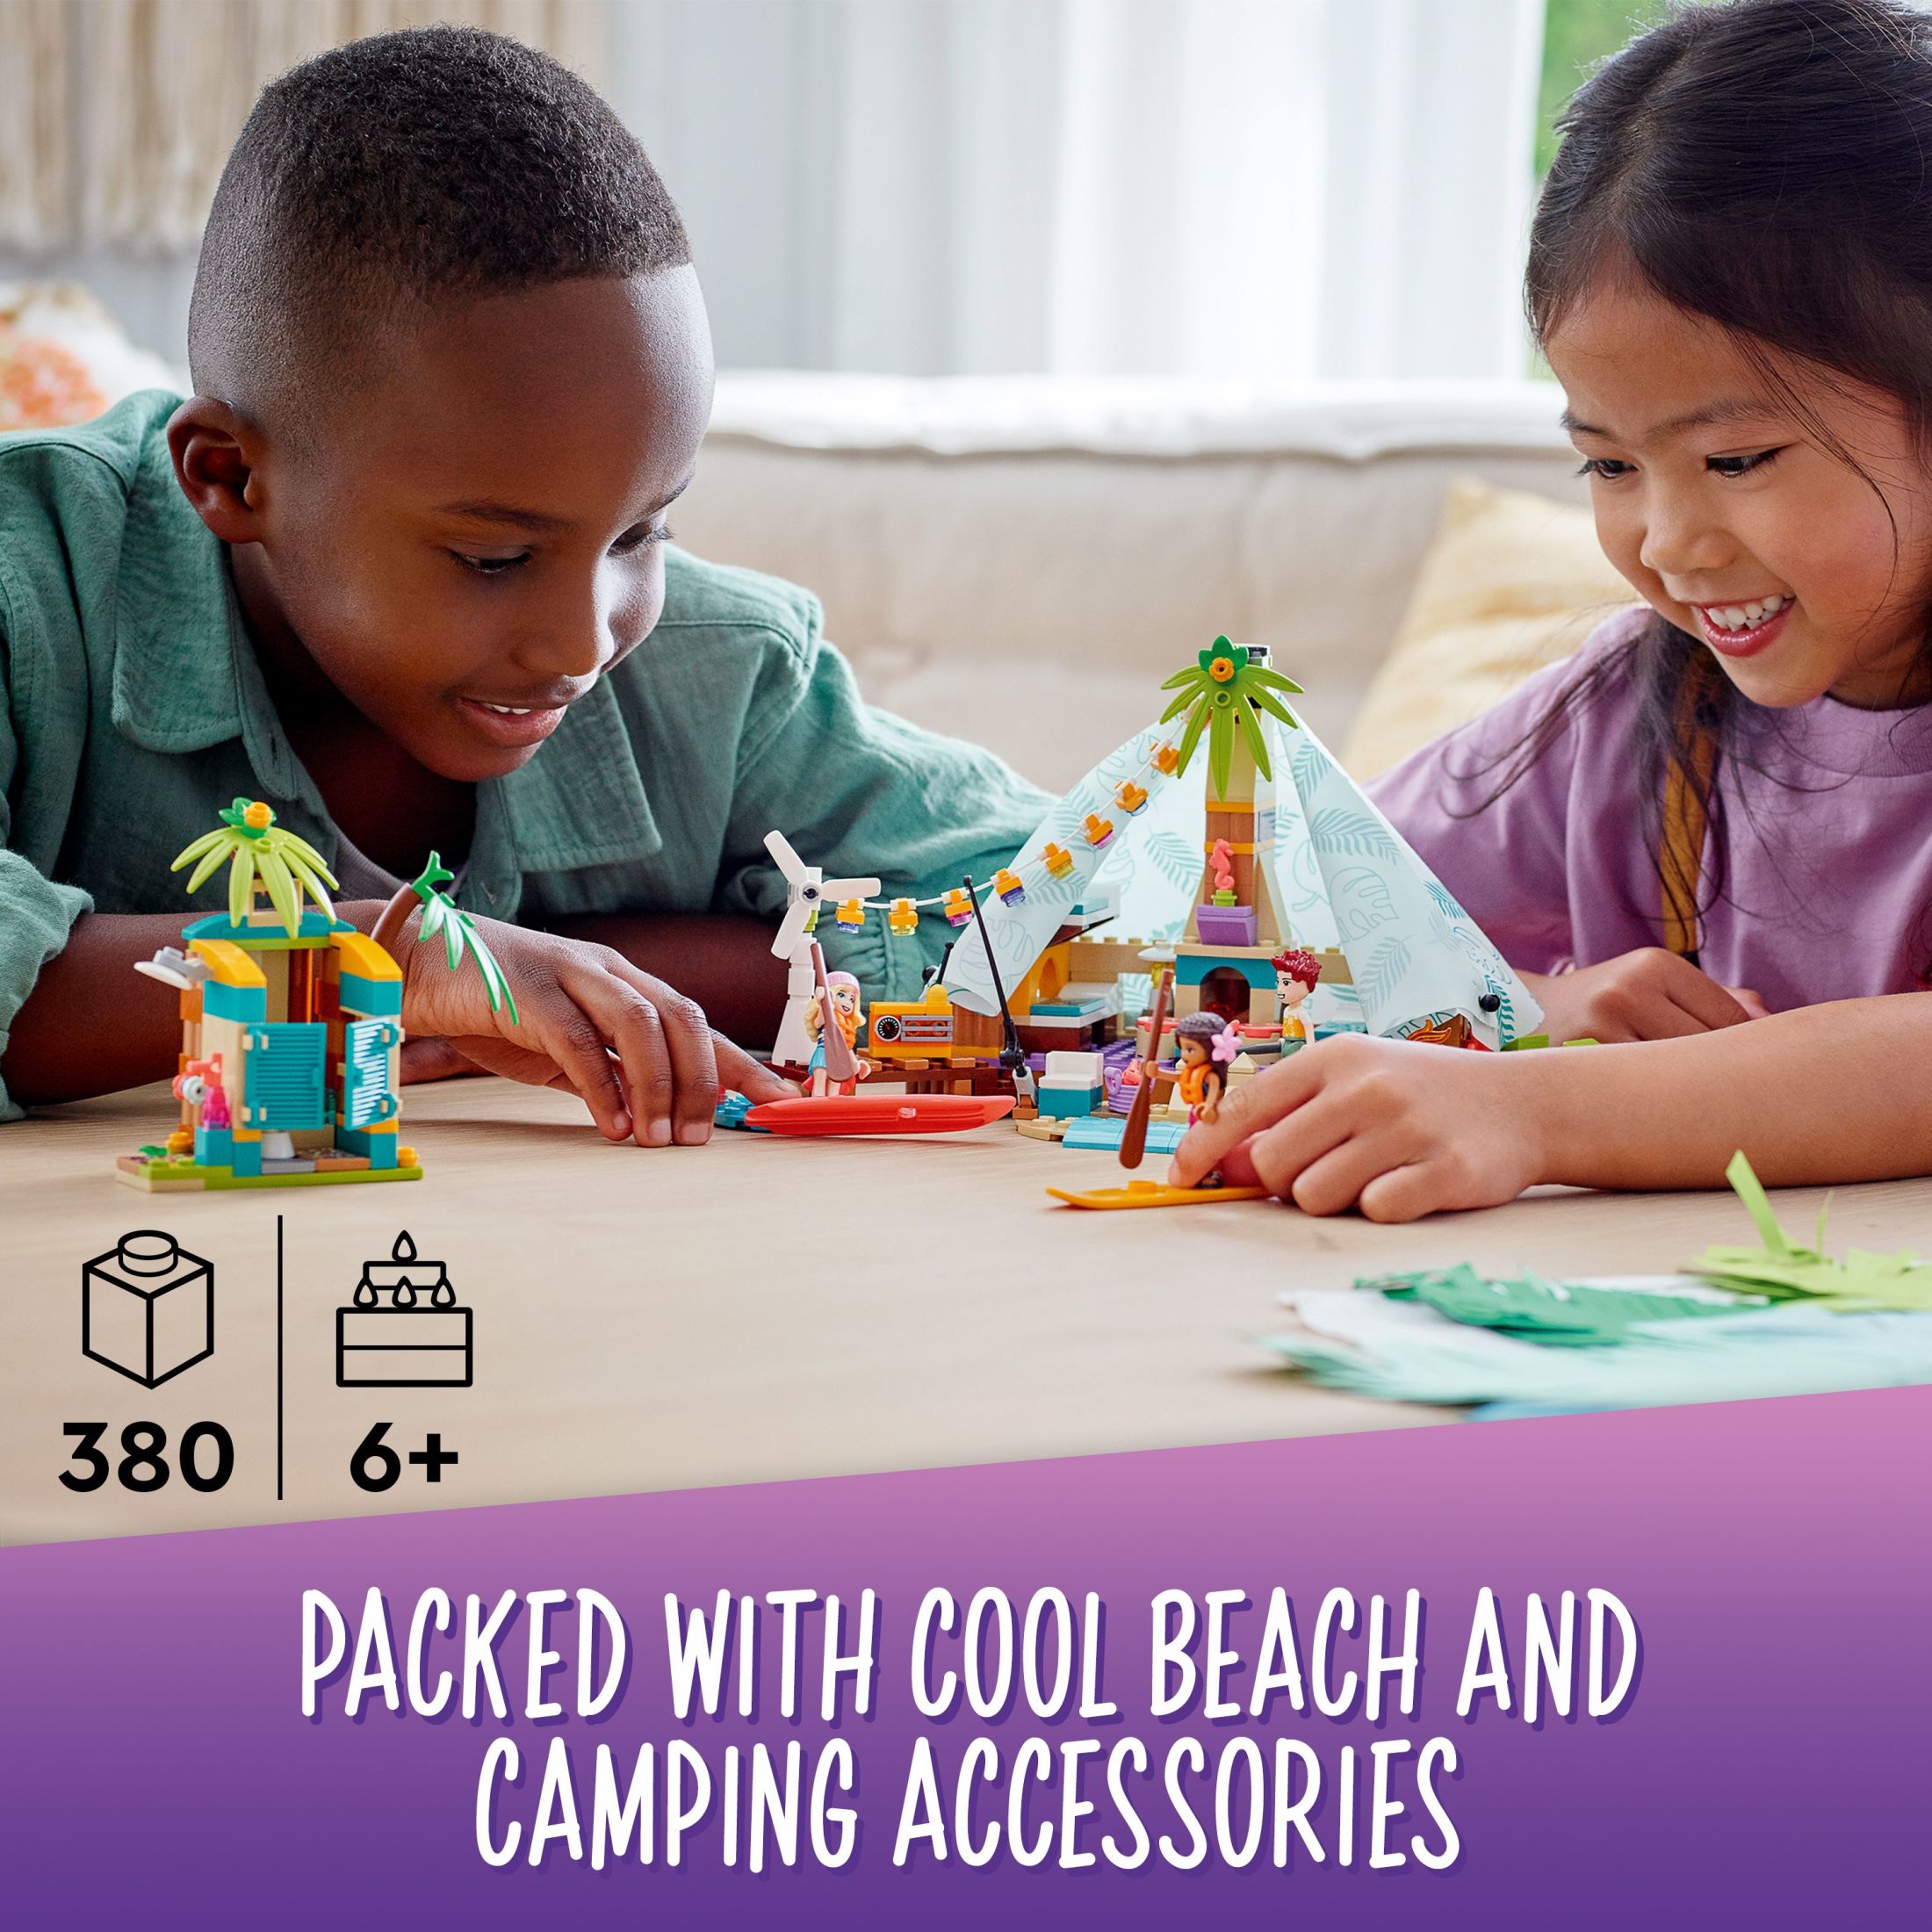 LEGO Friends Beach Glamping 41700 Building Kit; Creative Gift for Kids Aged 6 and up Who Love Nature Toys and Popular Glamping Trips (380 Pieces) - image 4 of 8